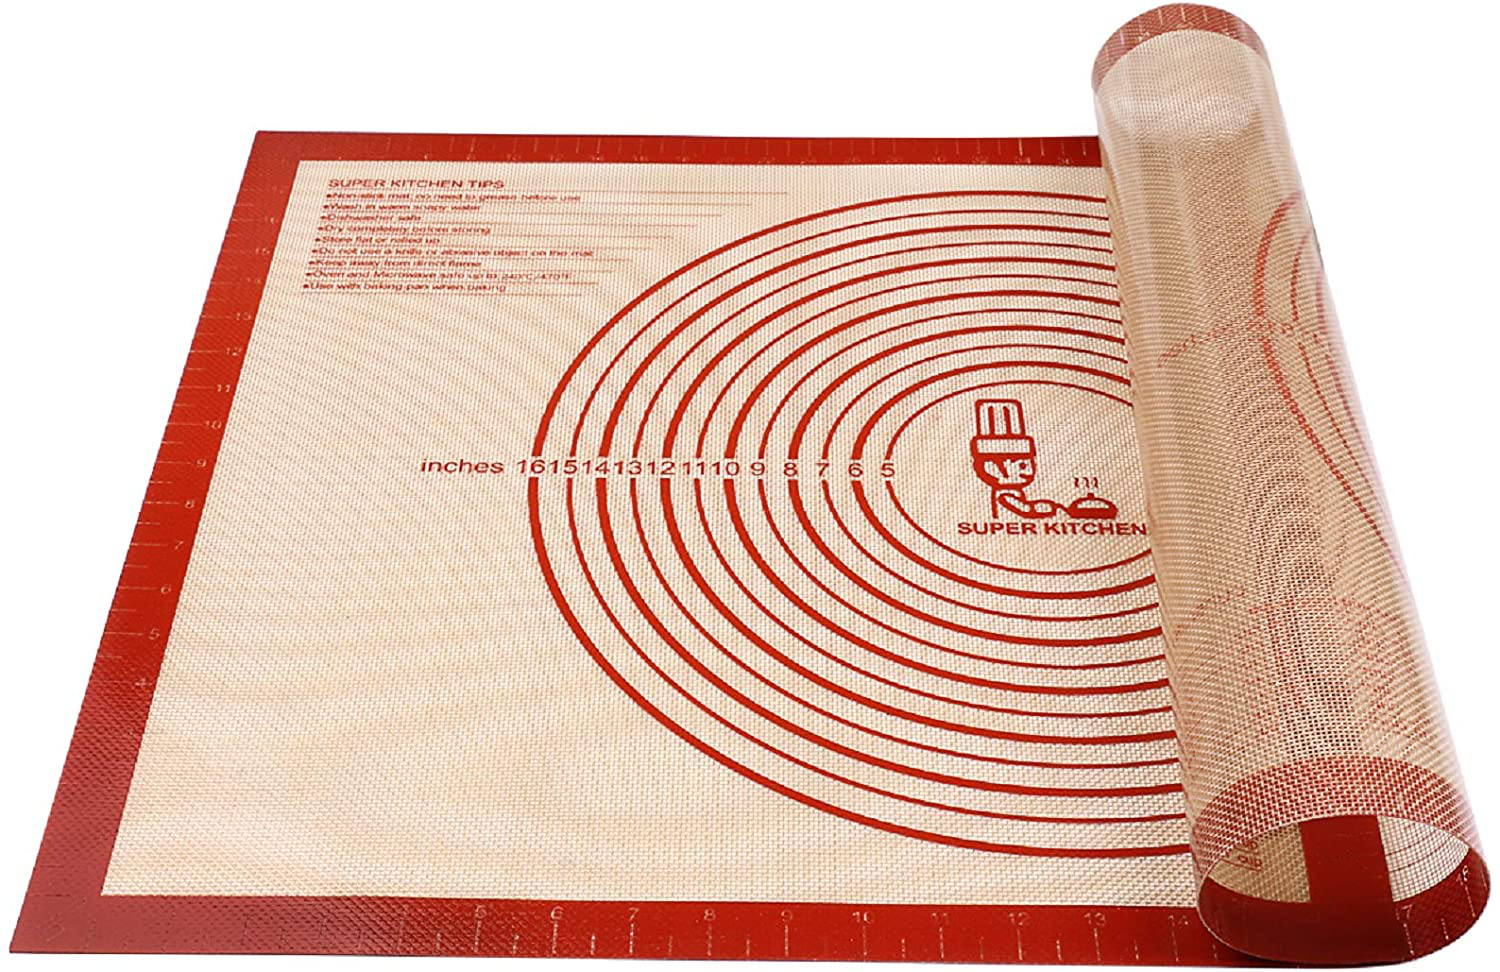 Large Silicone Pastry Baking Mat with Measurements,16 X 26 Inch Silicone Fondant Sheet, Non-Slip Mat Sticks to Countertop for Rolling Dough ，Pie and Baking Mat by Folksy Super Kitchen (16X26, Red)